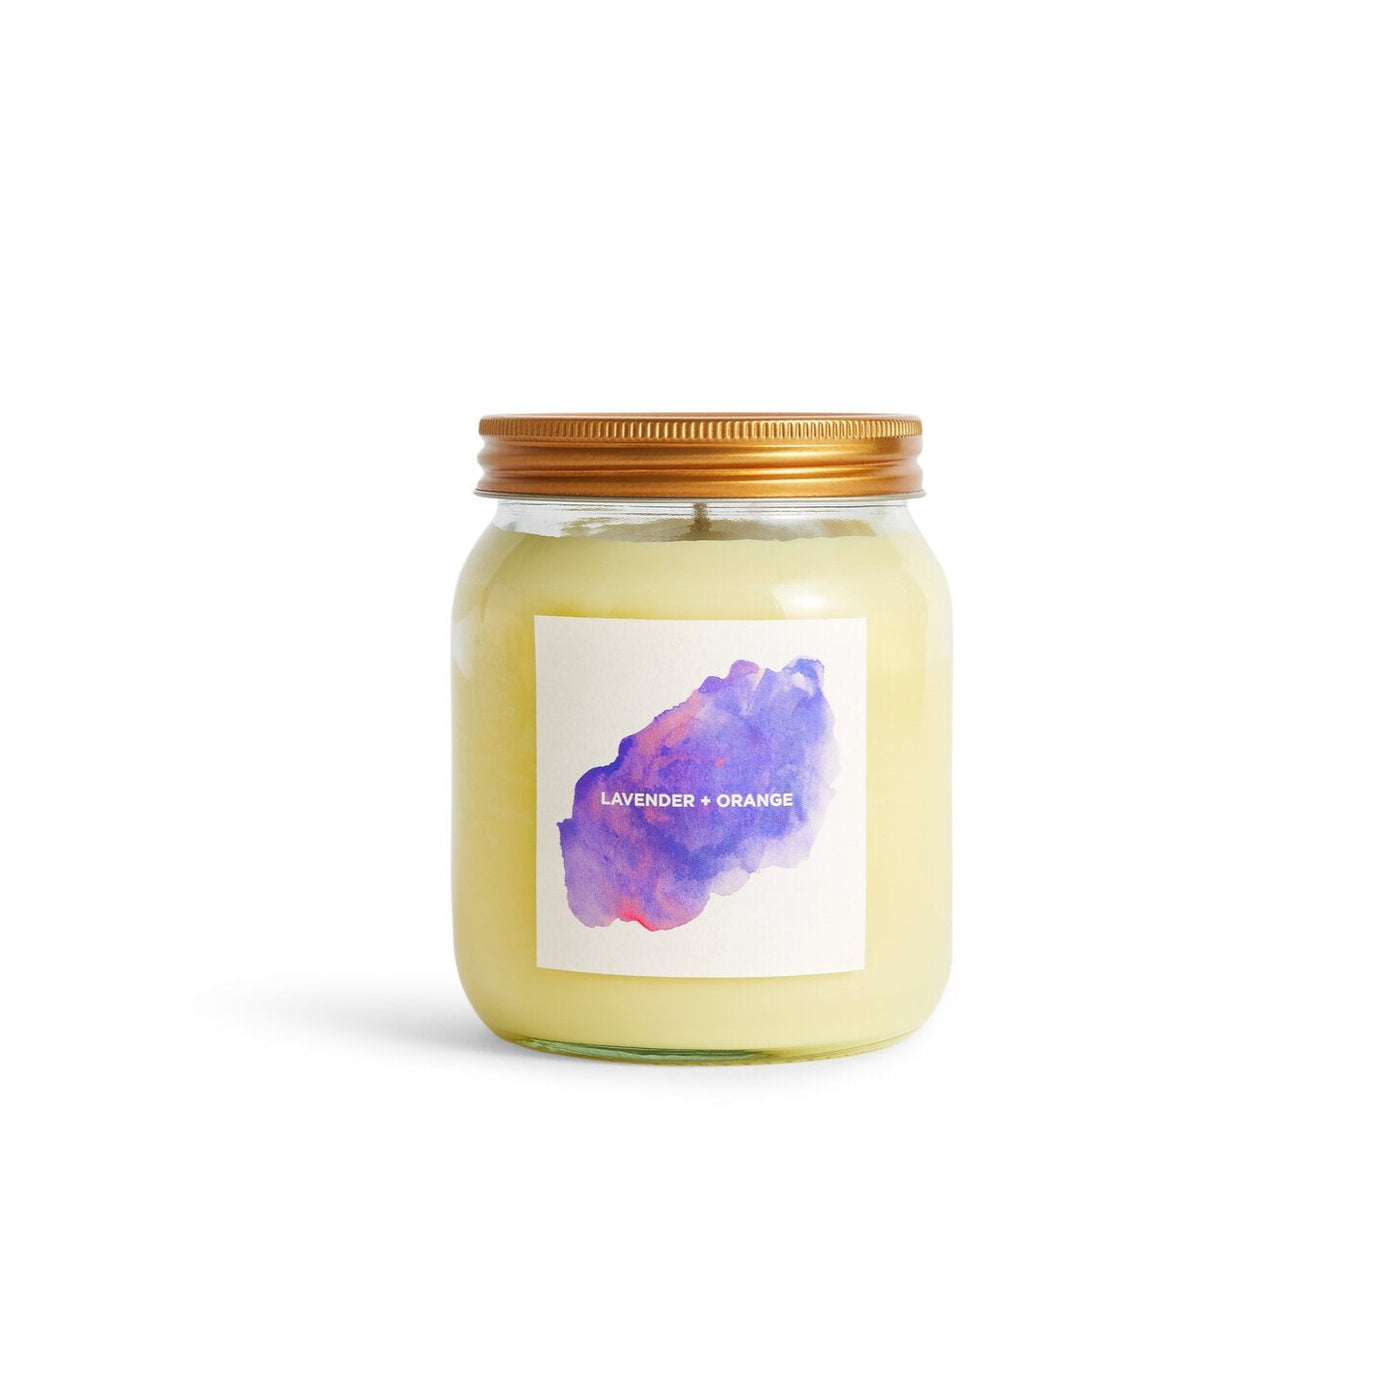 Self Care Co. Lavender & Orange Soy Aromatherapy Candle